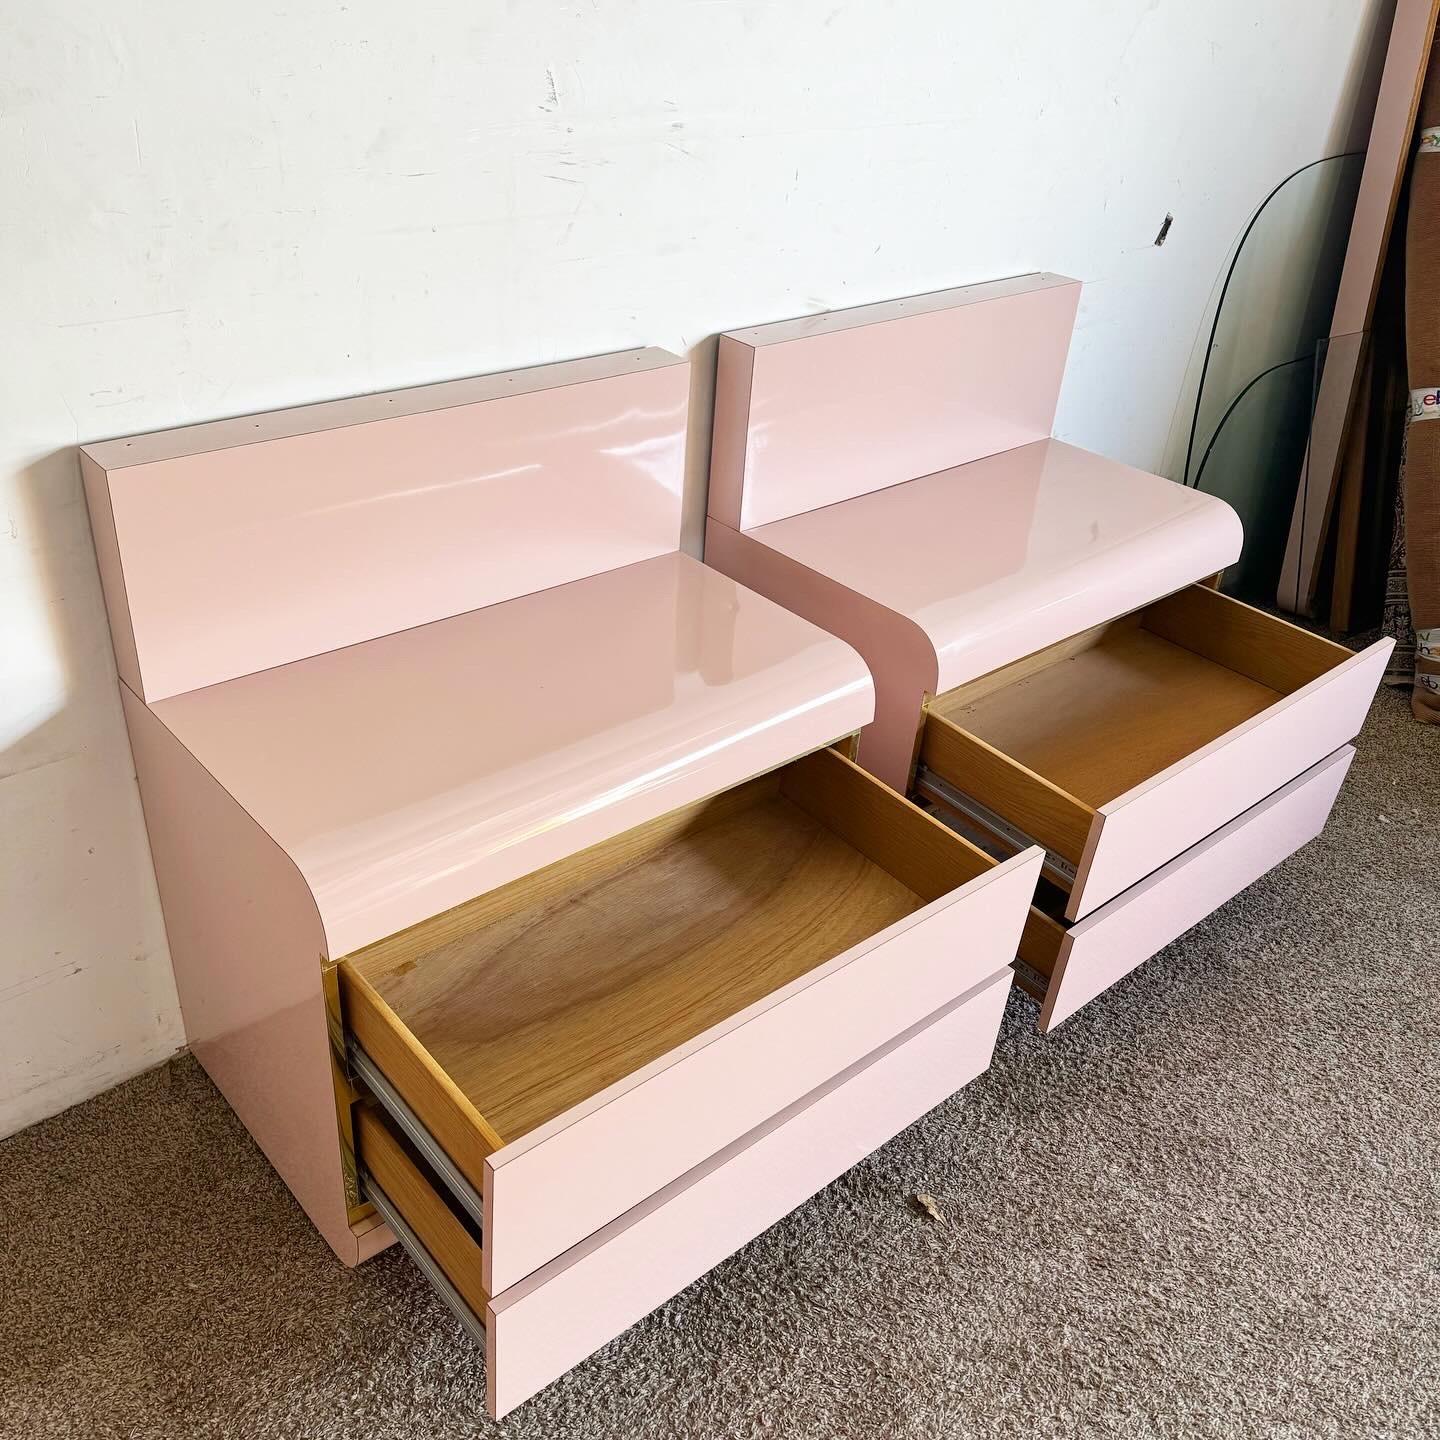 Late 20th Century Postmodern Pink Lacquer Laminate Waterfall Nightstands With Gold Accents, a Pair For Sale